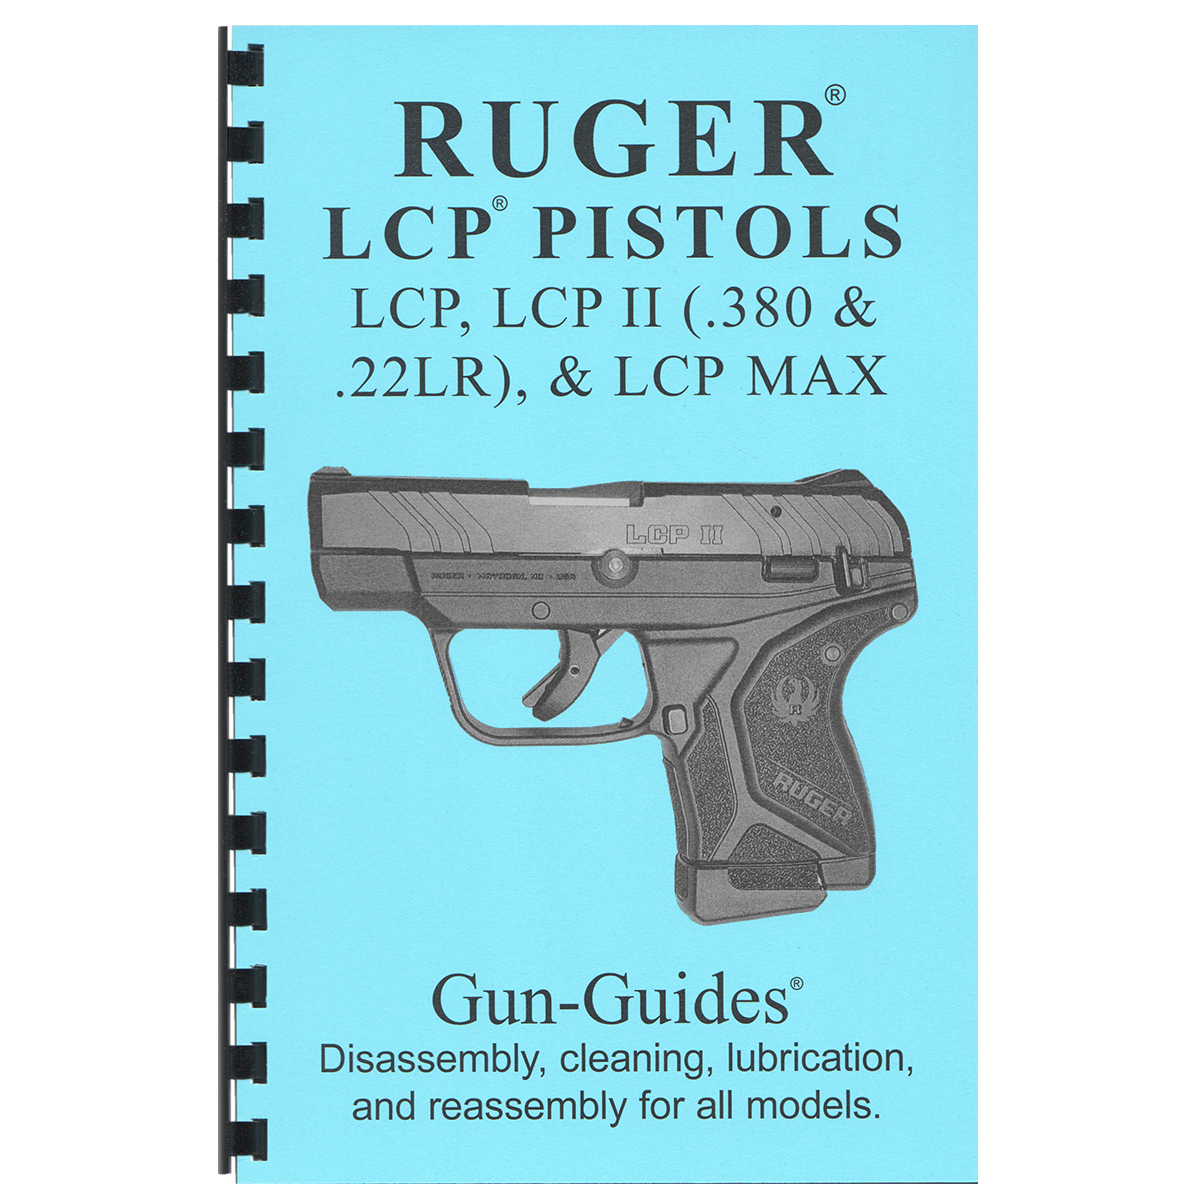 RUGER® LCP Pistols. Disassembly, cleaning, lubrication and reassembly for all models.